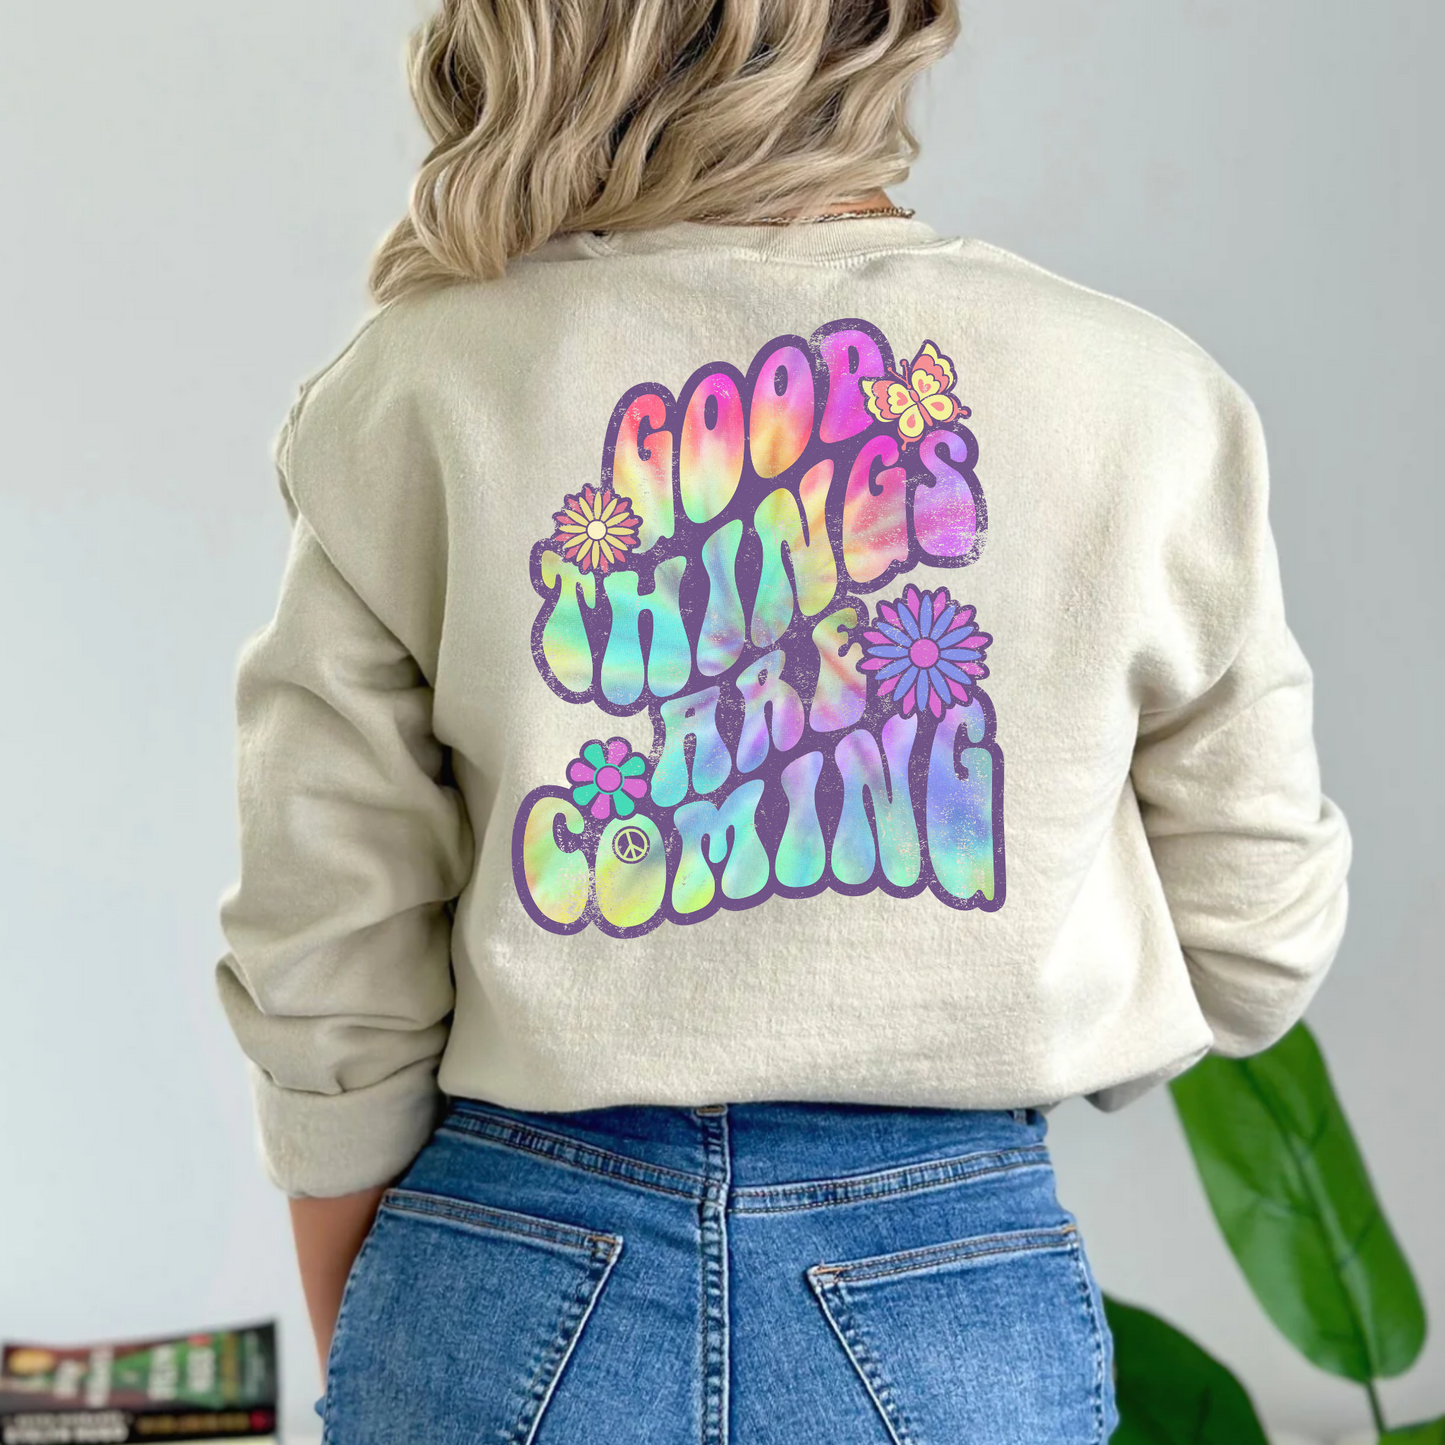 (shirt not included) Good Things Are Coming Retro  Matte Clear Film Transfer